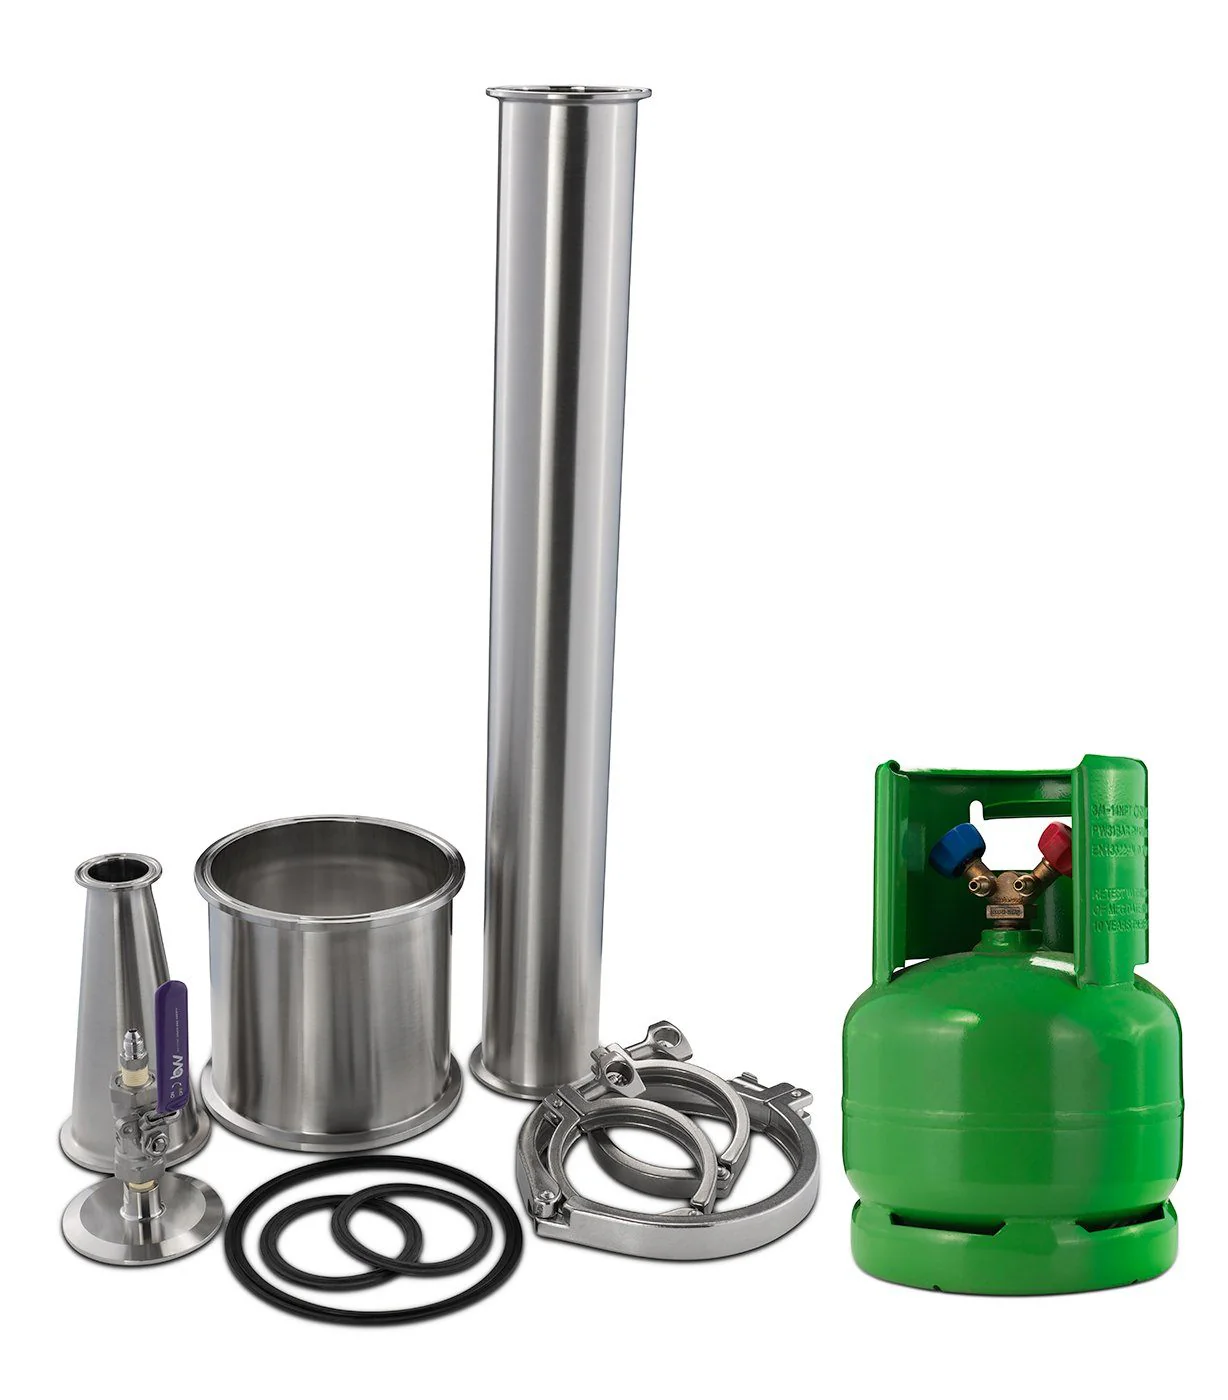 I've recently bought a 3" Dewaxing Closed Column 180G-2LB and am looking to recover the butane would this work?